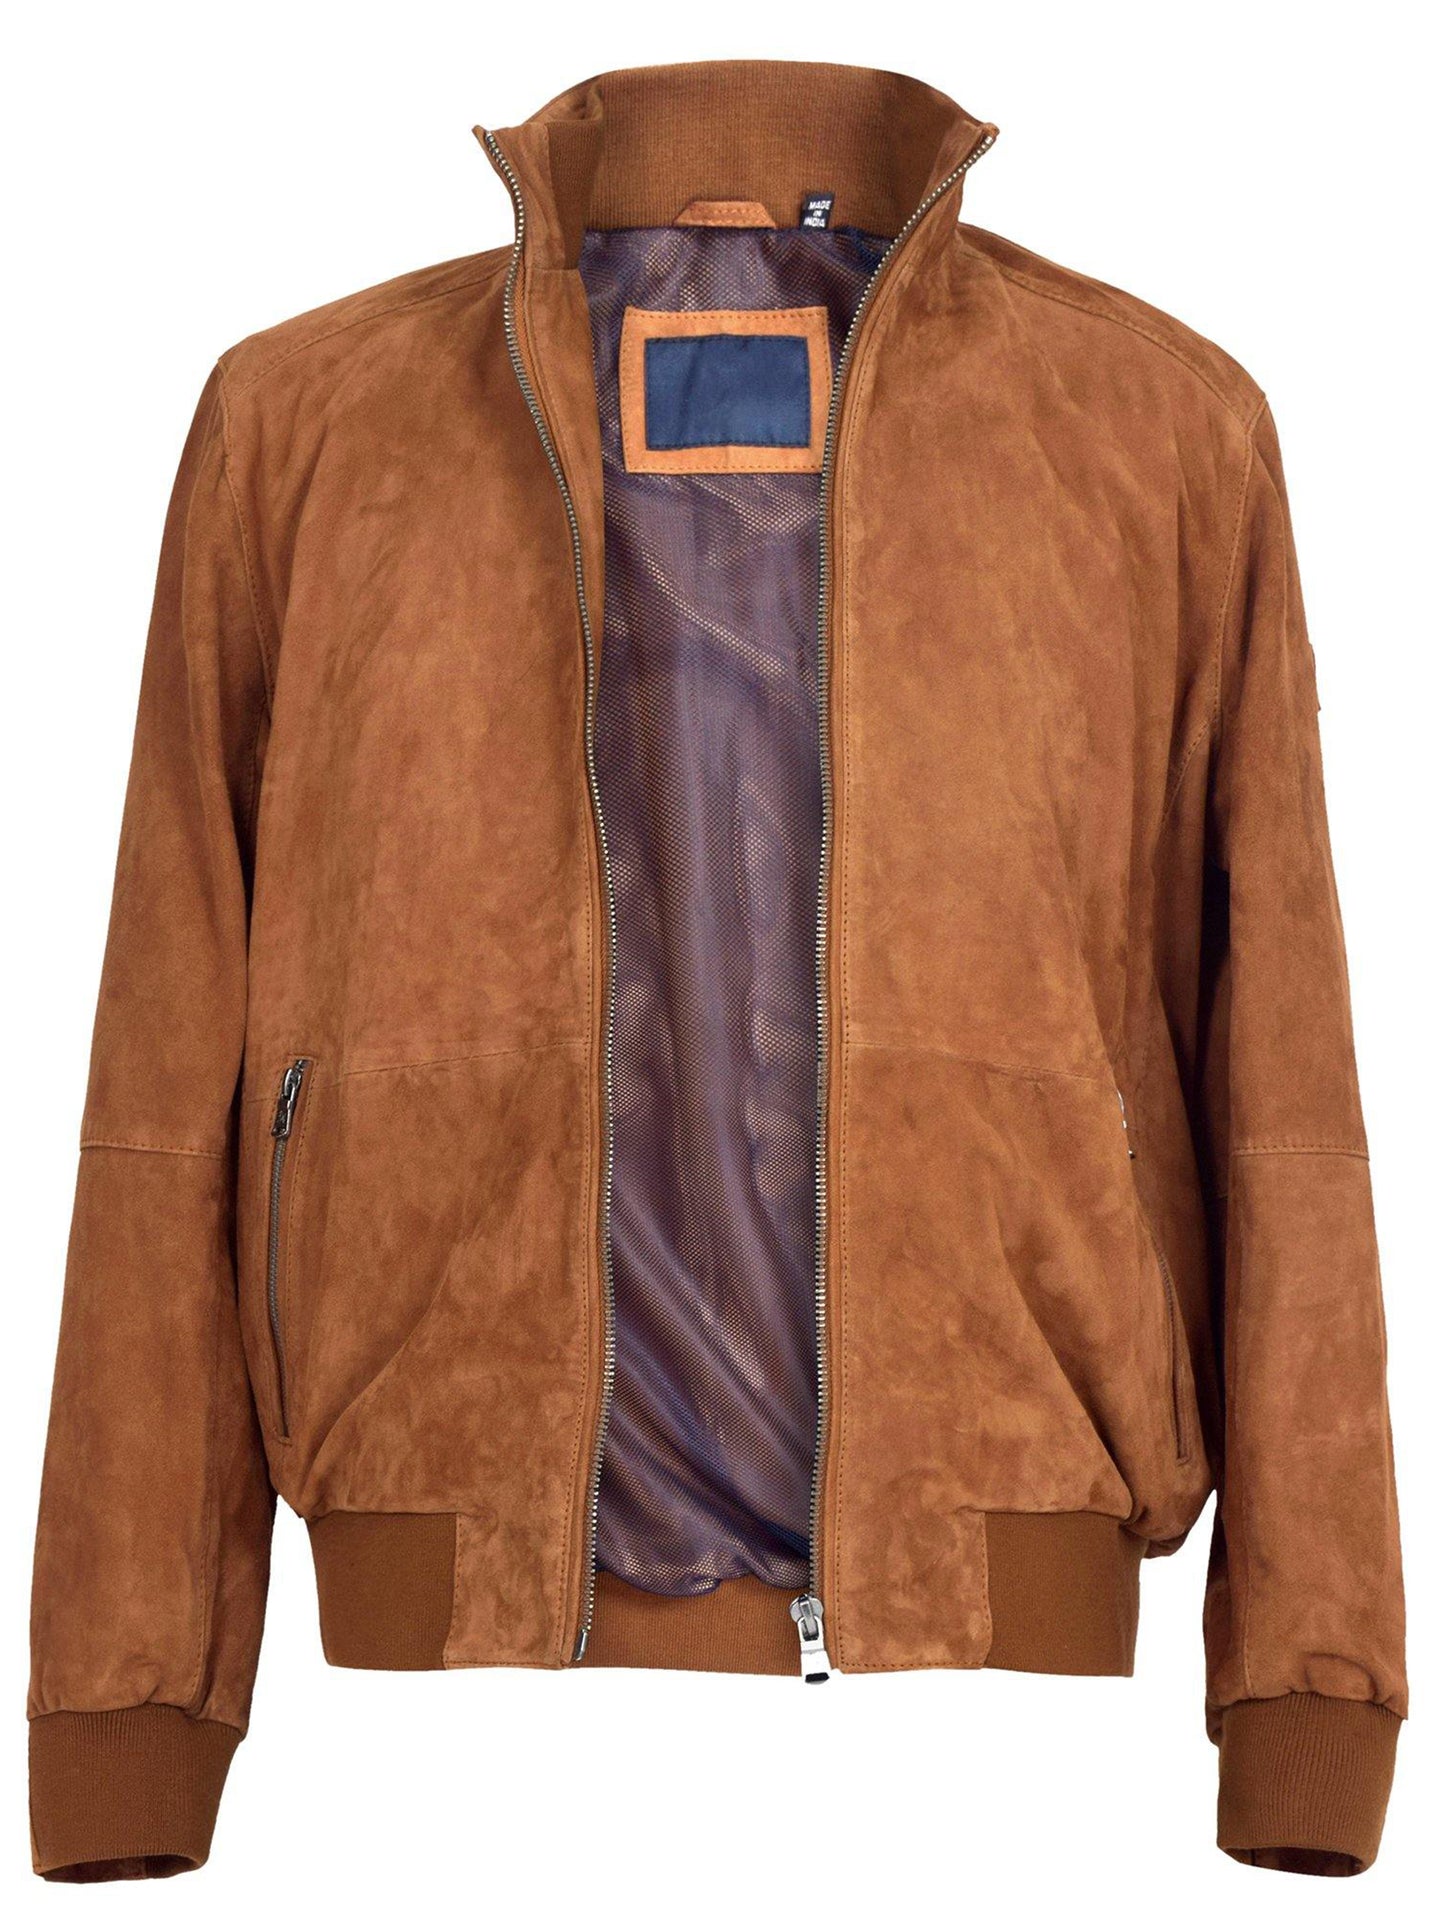 Tobacco Suede Leather Bomber Jacket